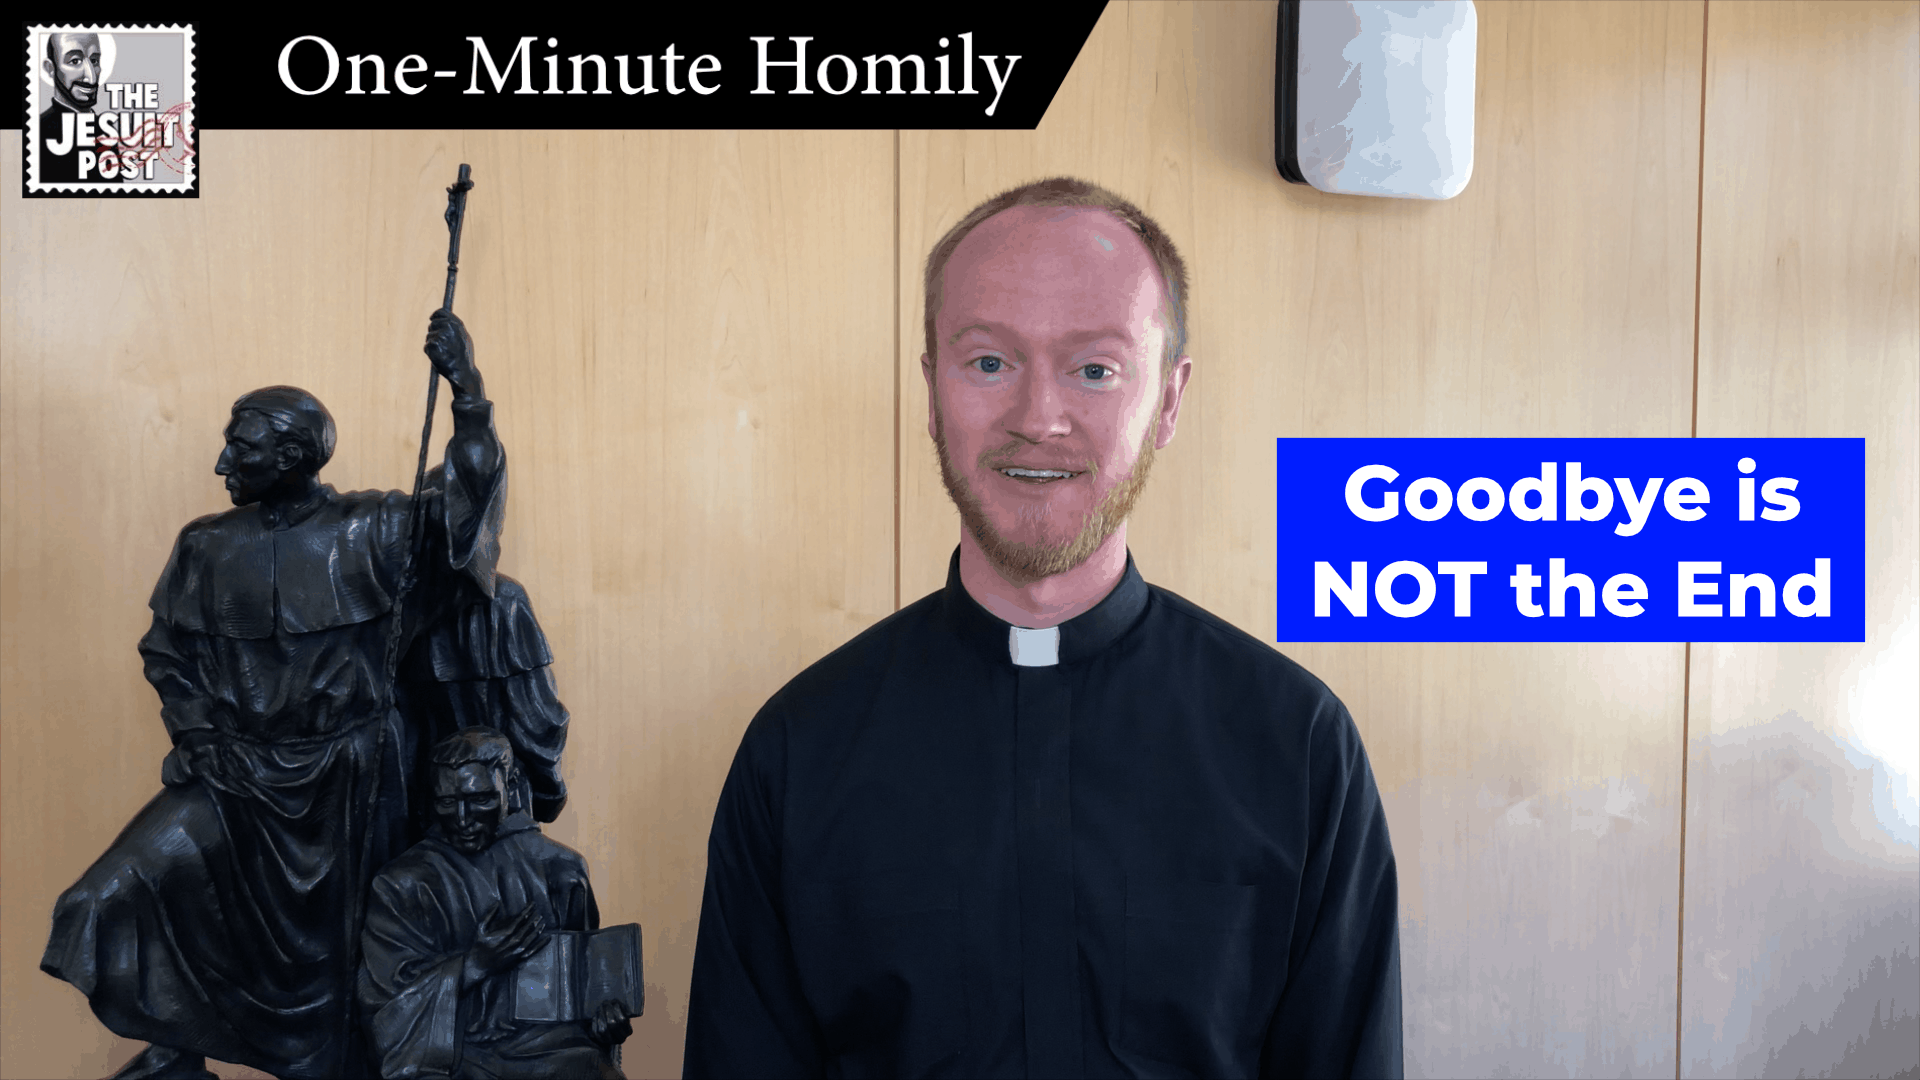 One-Minute Homily: “Goodbye is NOT the End”